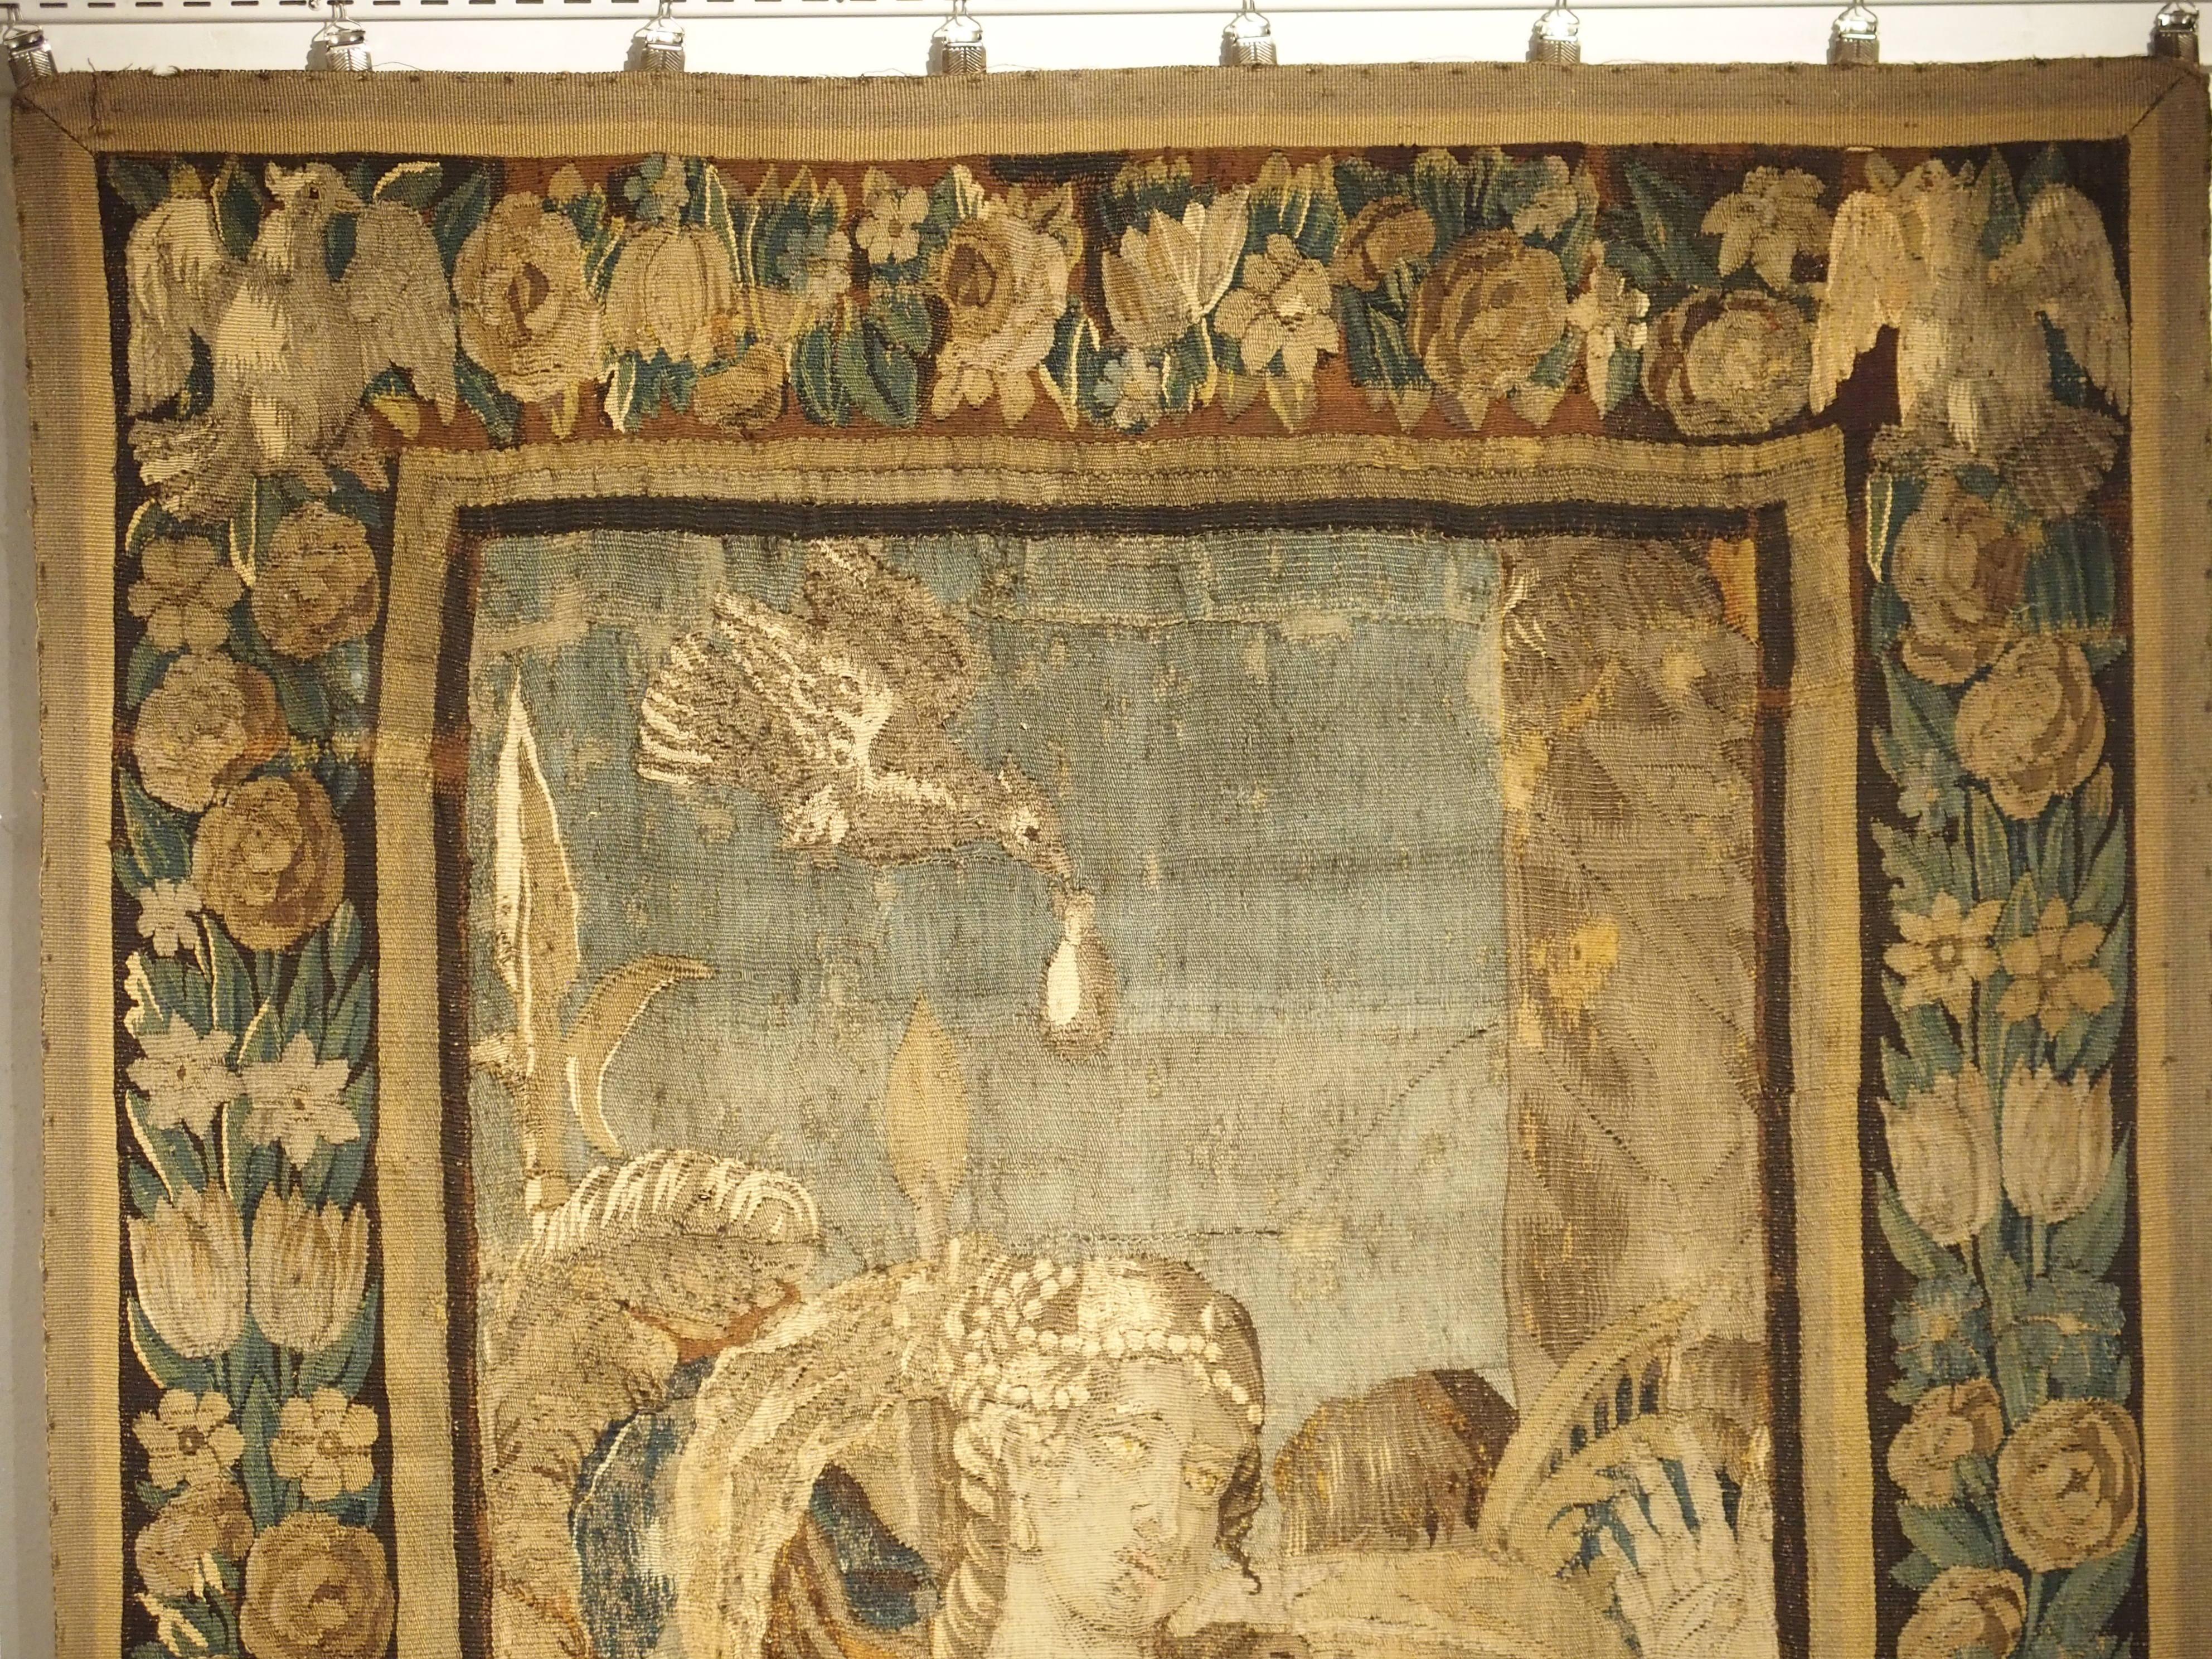 This incredible tapestry fragment depicts a Noble woman with a warrior standing to the back left, carrying a halberd. She has pearls in her hair and on her wrist, and is wearing a robe trimmed in ermine and adorned with Fleur de Lys throughout. A